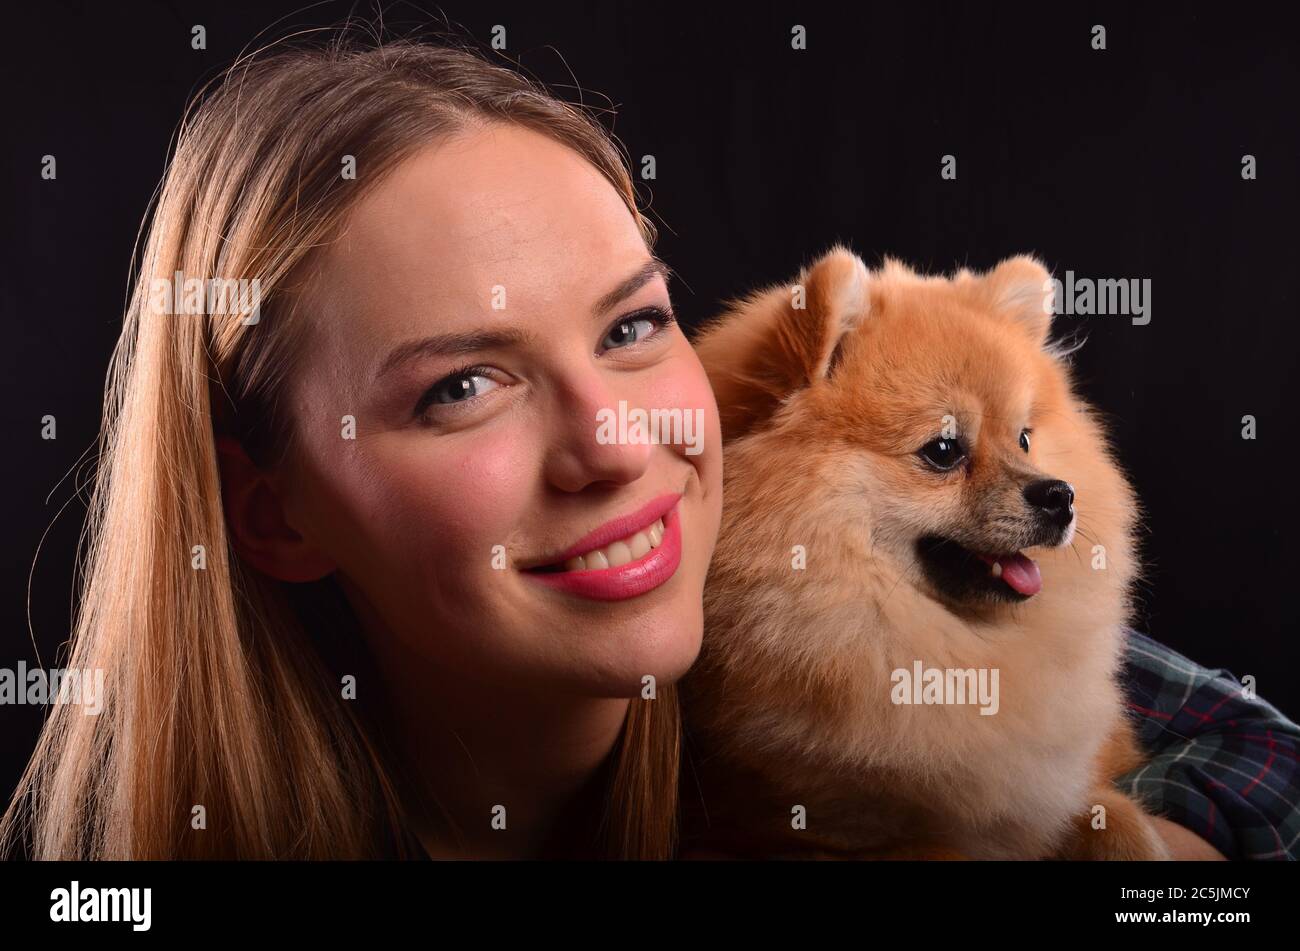 Portrait of beautiful smiling blonde girl and young Pomeranian or Spitz dog with fluffy fur Stock Photo